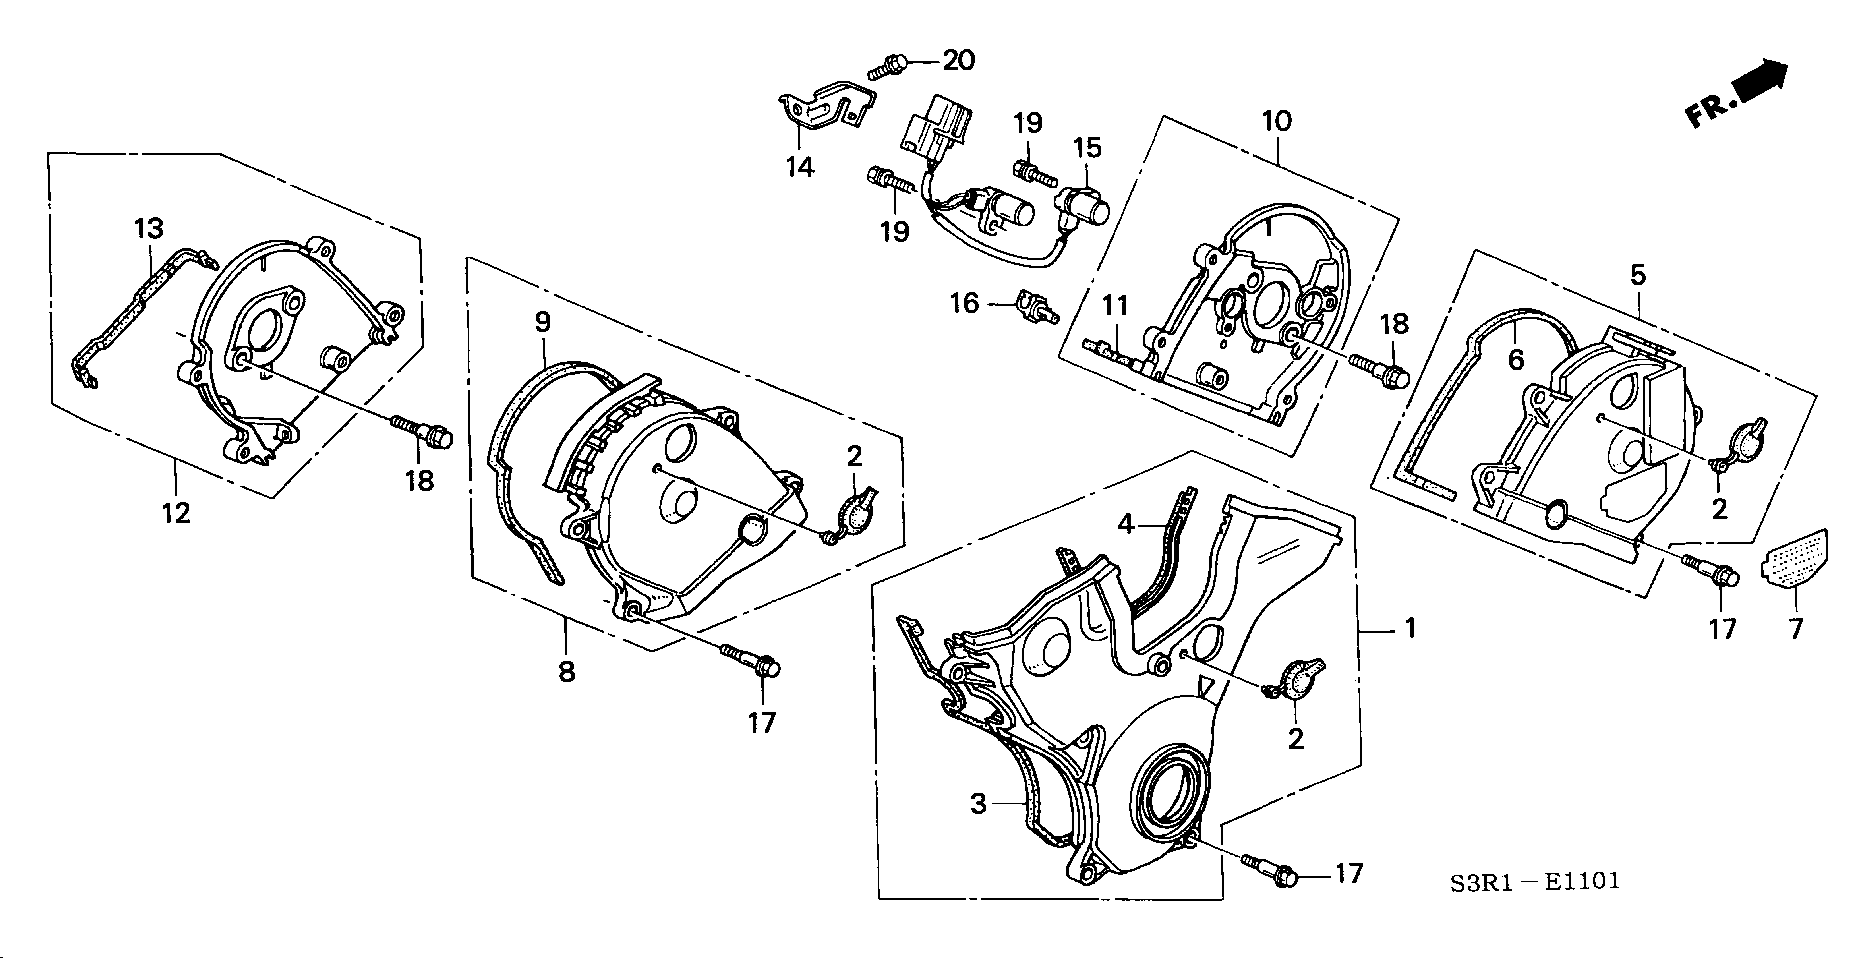 TIMING BELT COVER